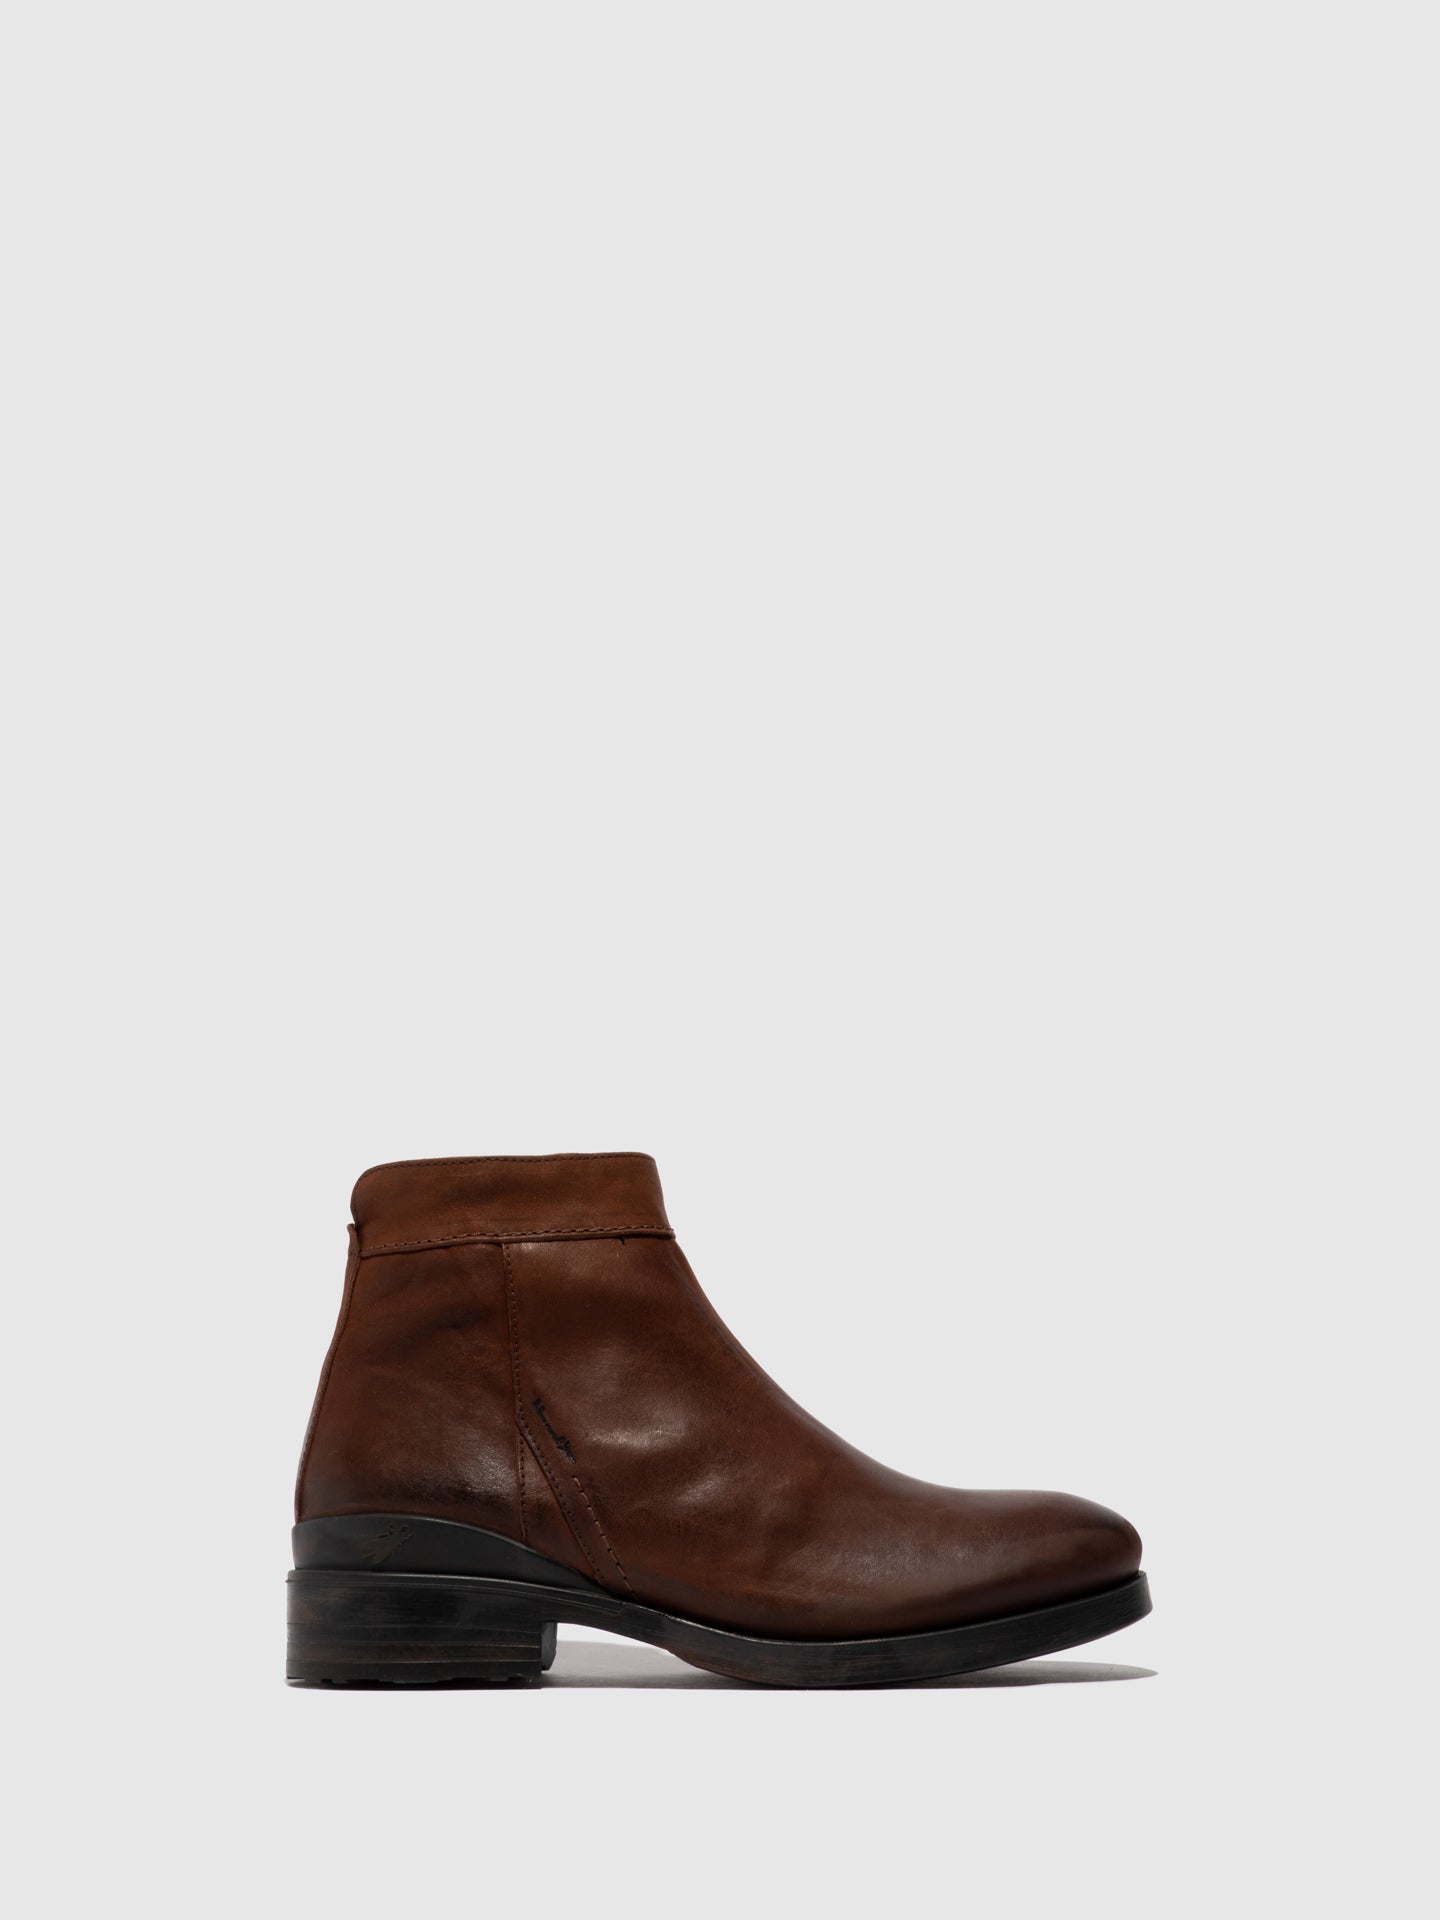 Fly London Zip Up Ankle Boots MIBO345FLY CHESTNUT